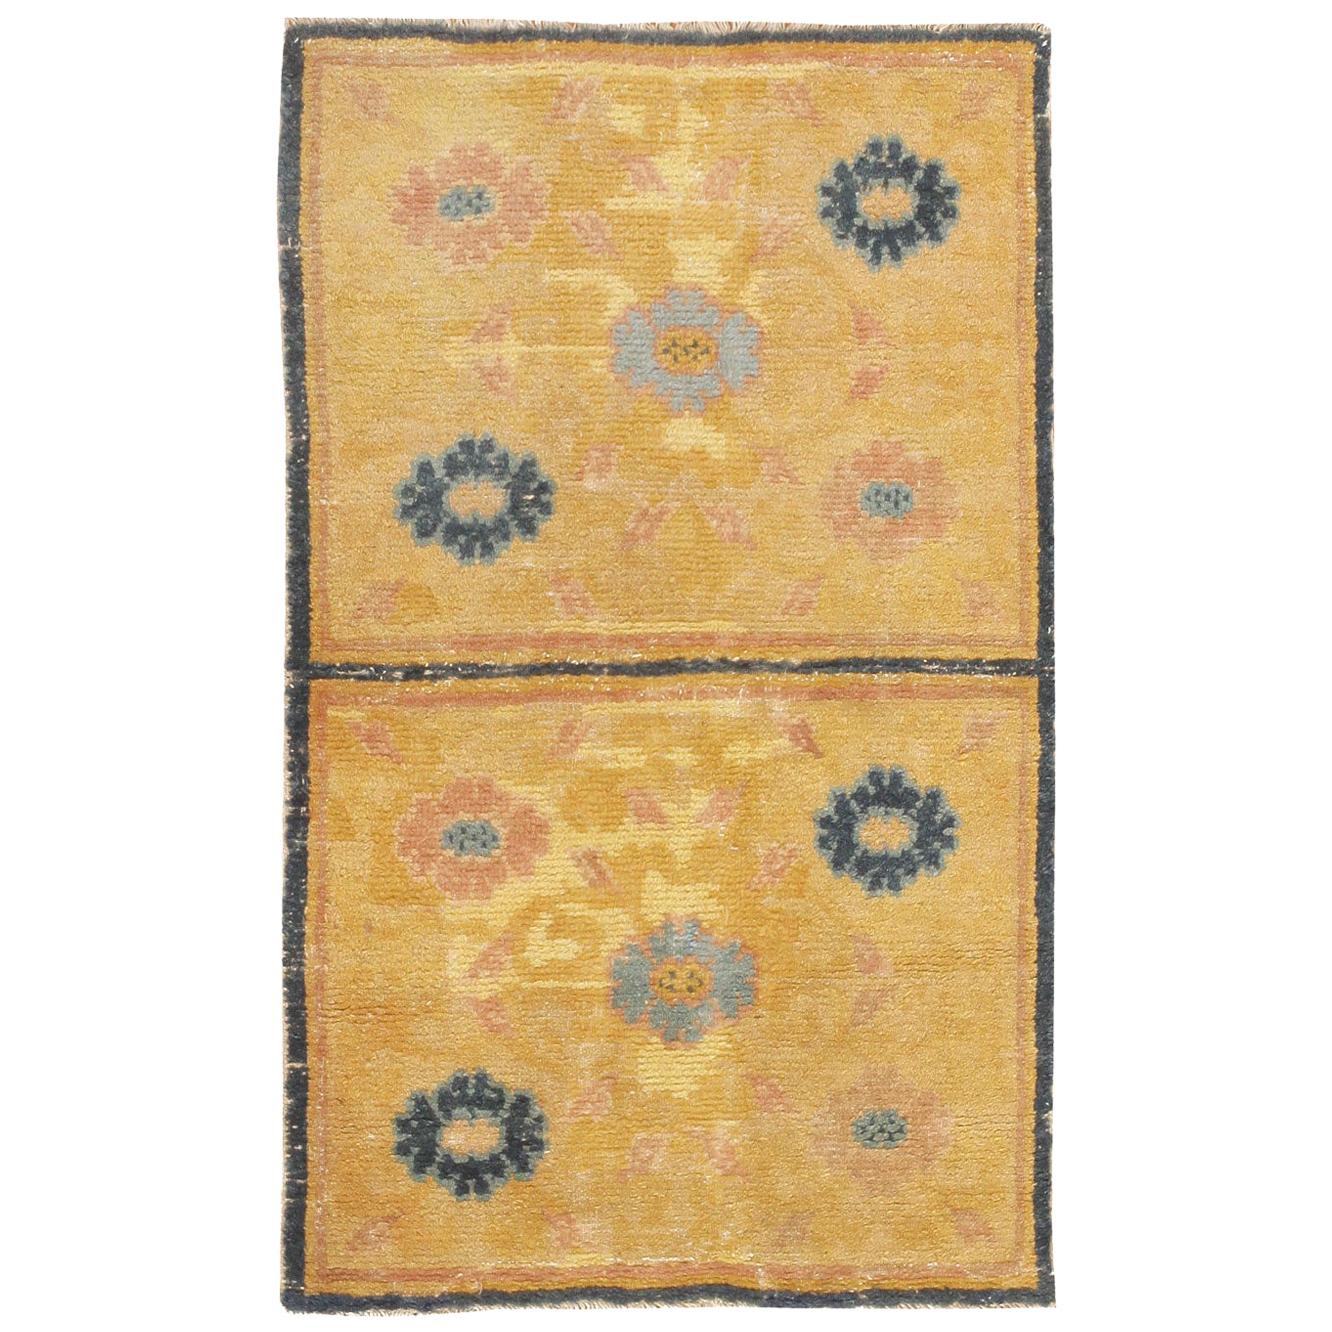 Antique Chinese Rug. Size: 2 ft 3 in x 3 ft 9 in (0.69 m x 1.14 m)